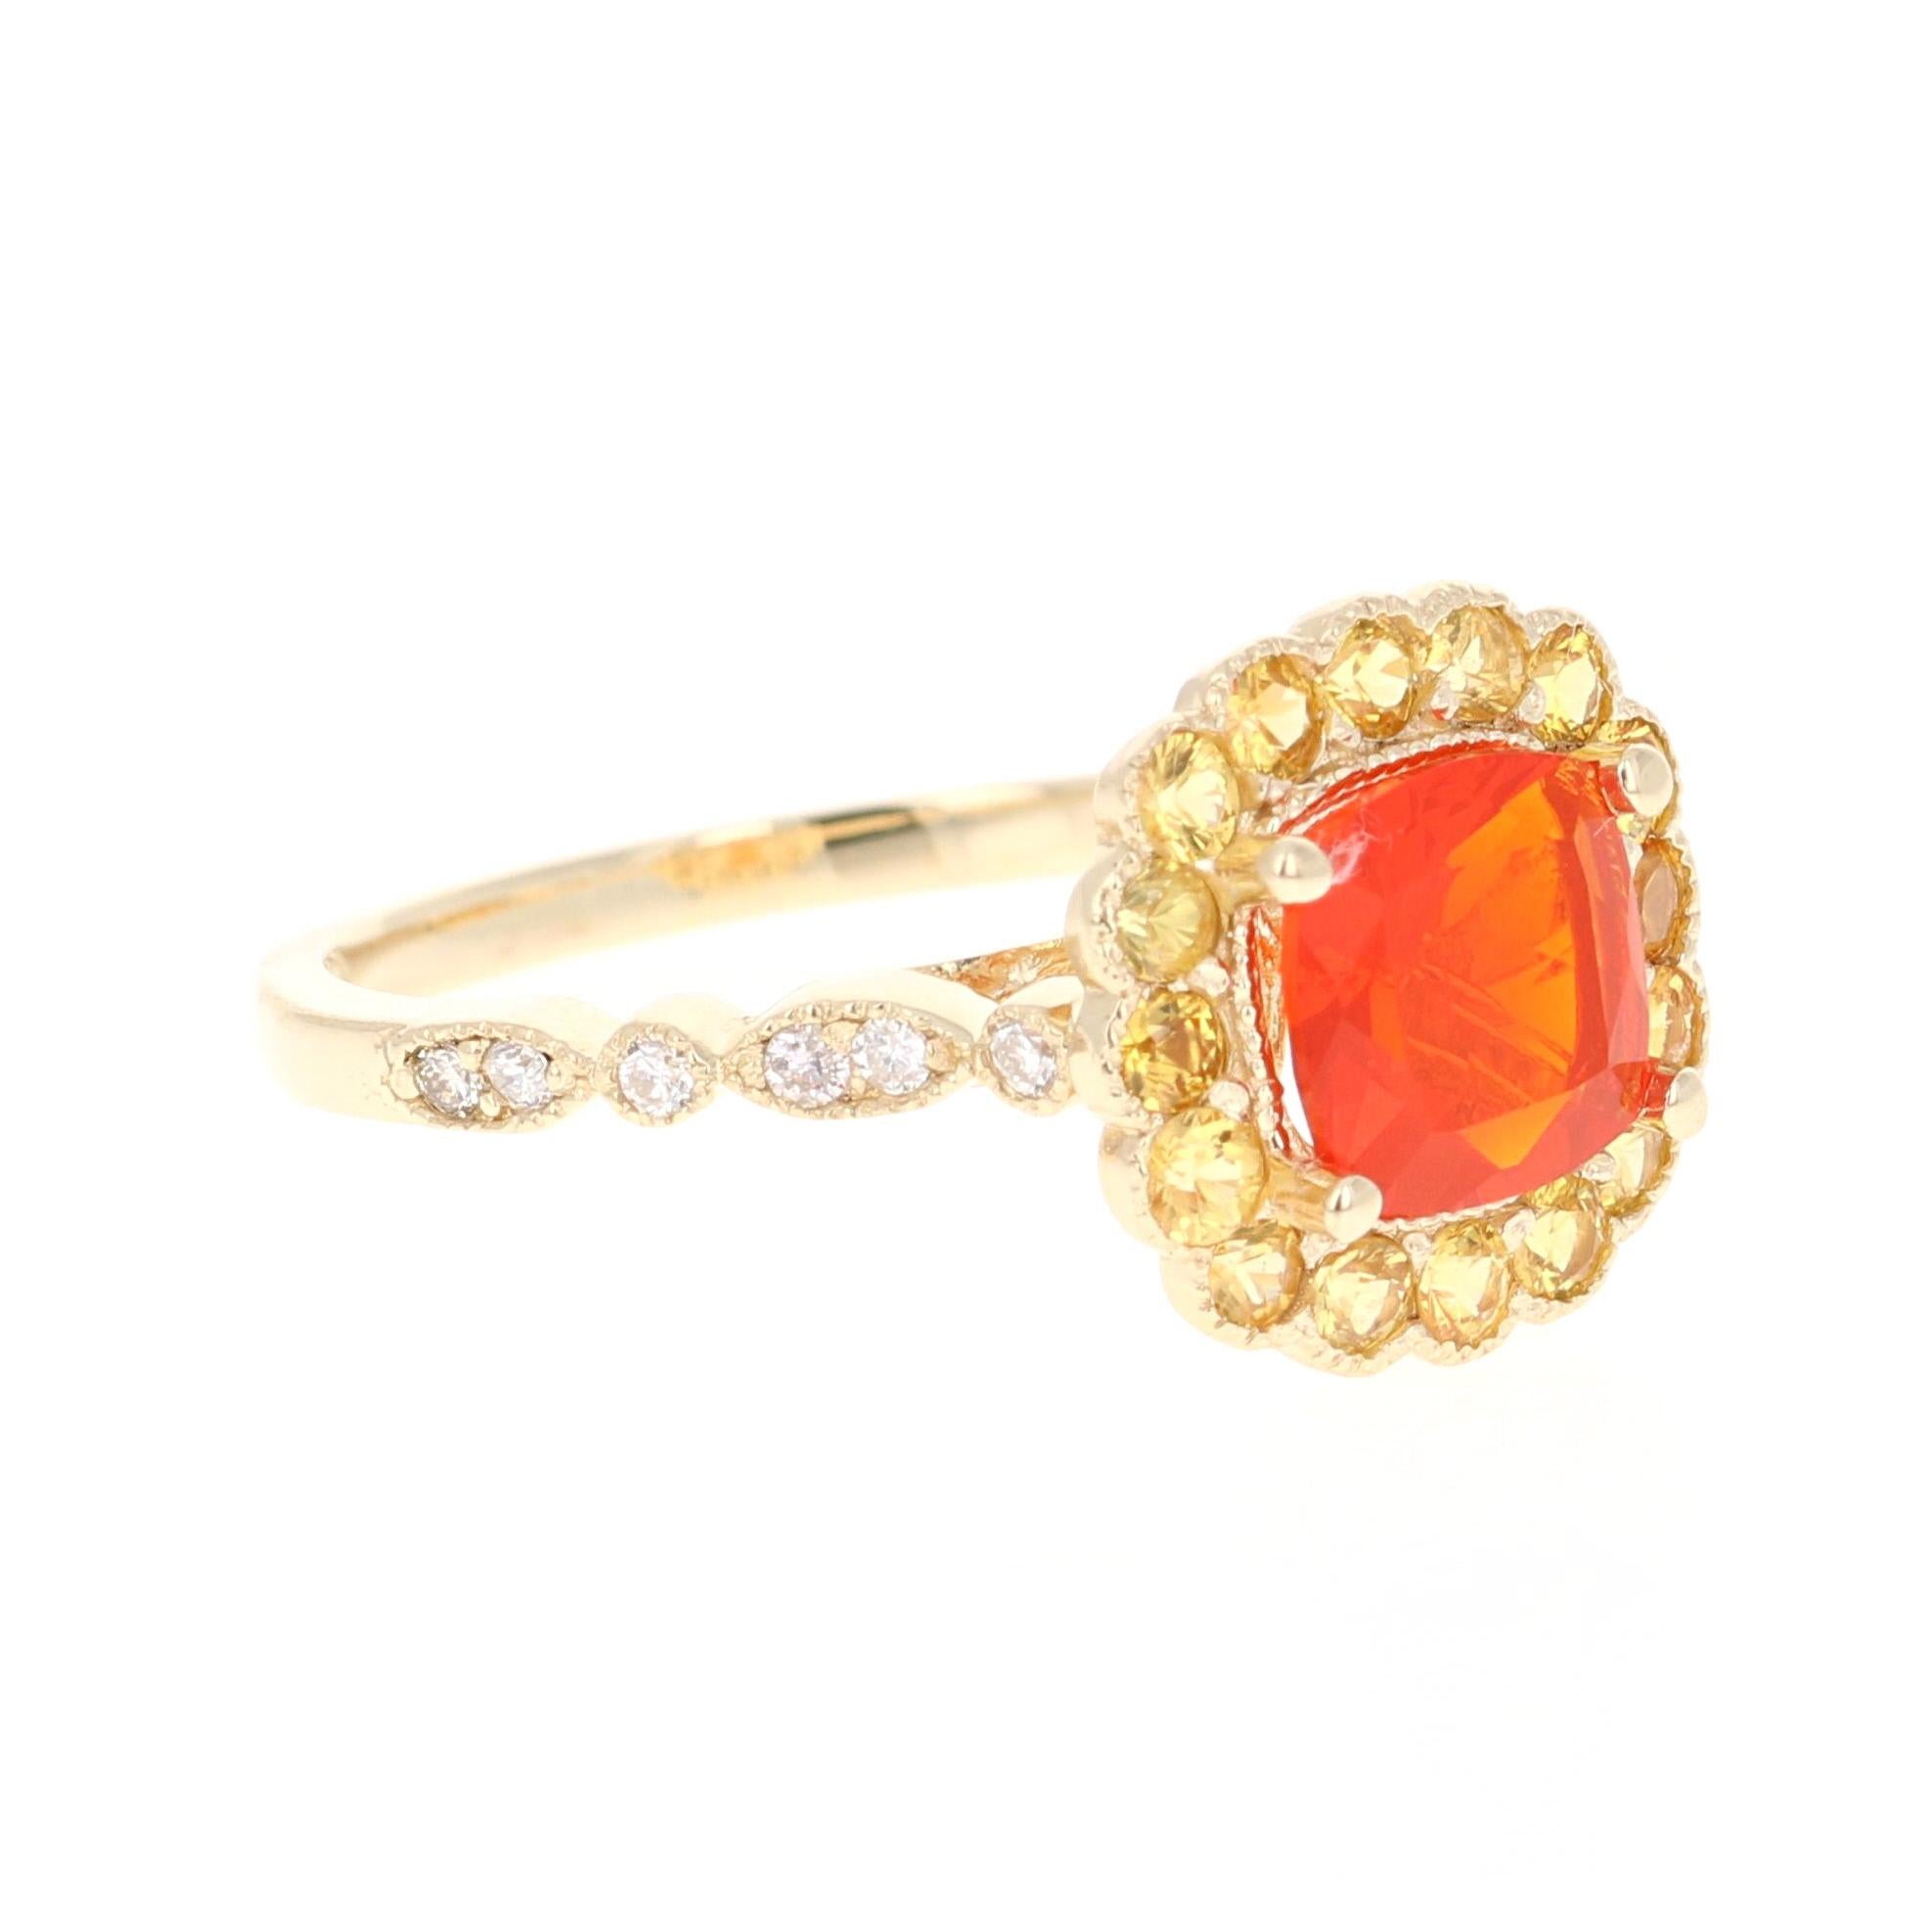 Beautiful Fire Opal, Yellow Sapphire and Diamond Ring!

This uniquely designed ring has a 0.87 carat Cushion Cut Fire Opal in the center of the ring.  The Fire Opal is surrounded by 16 Round Cut Yellow Sapphires that weigh 0.65 carats and 12 Round